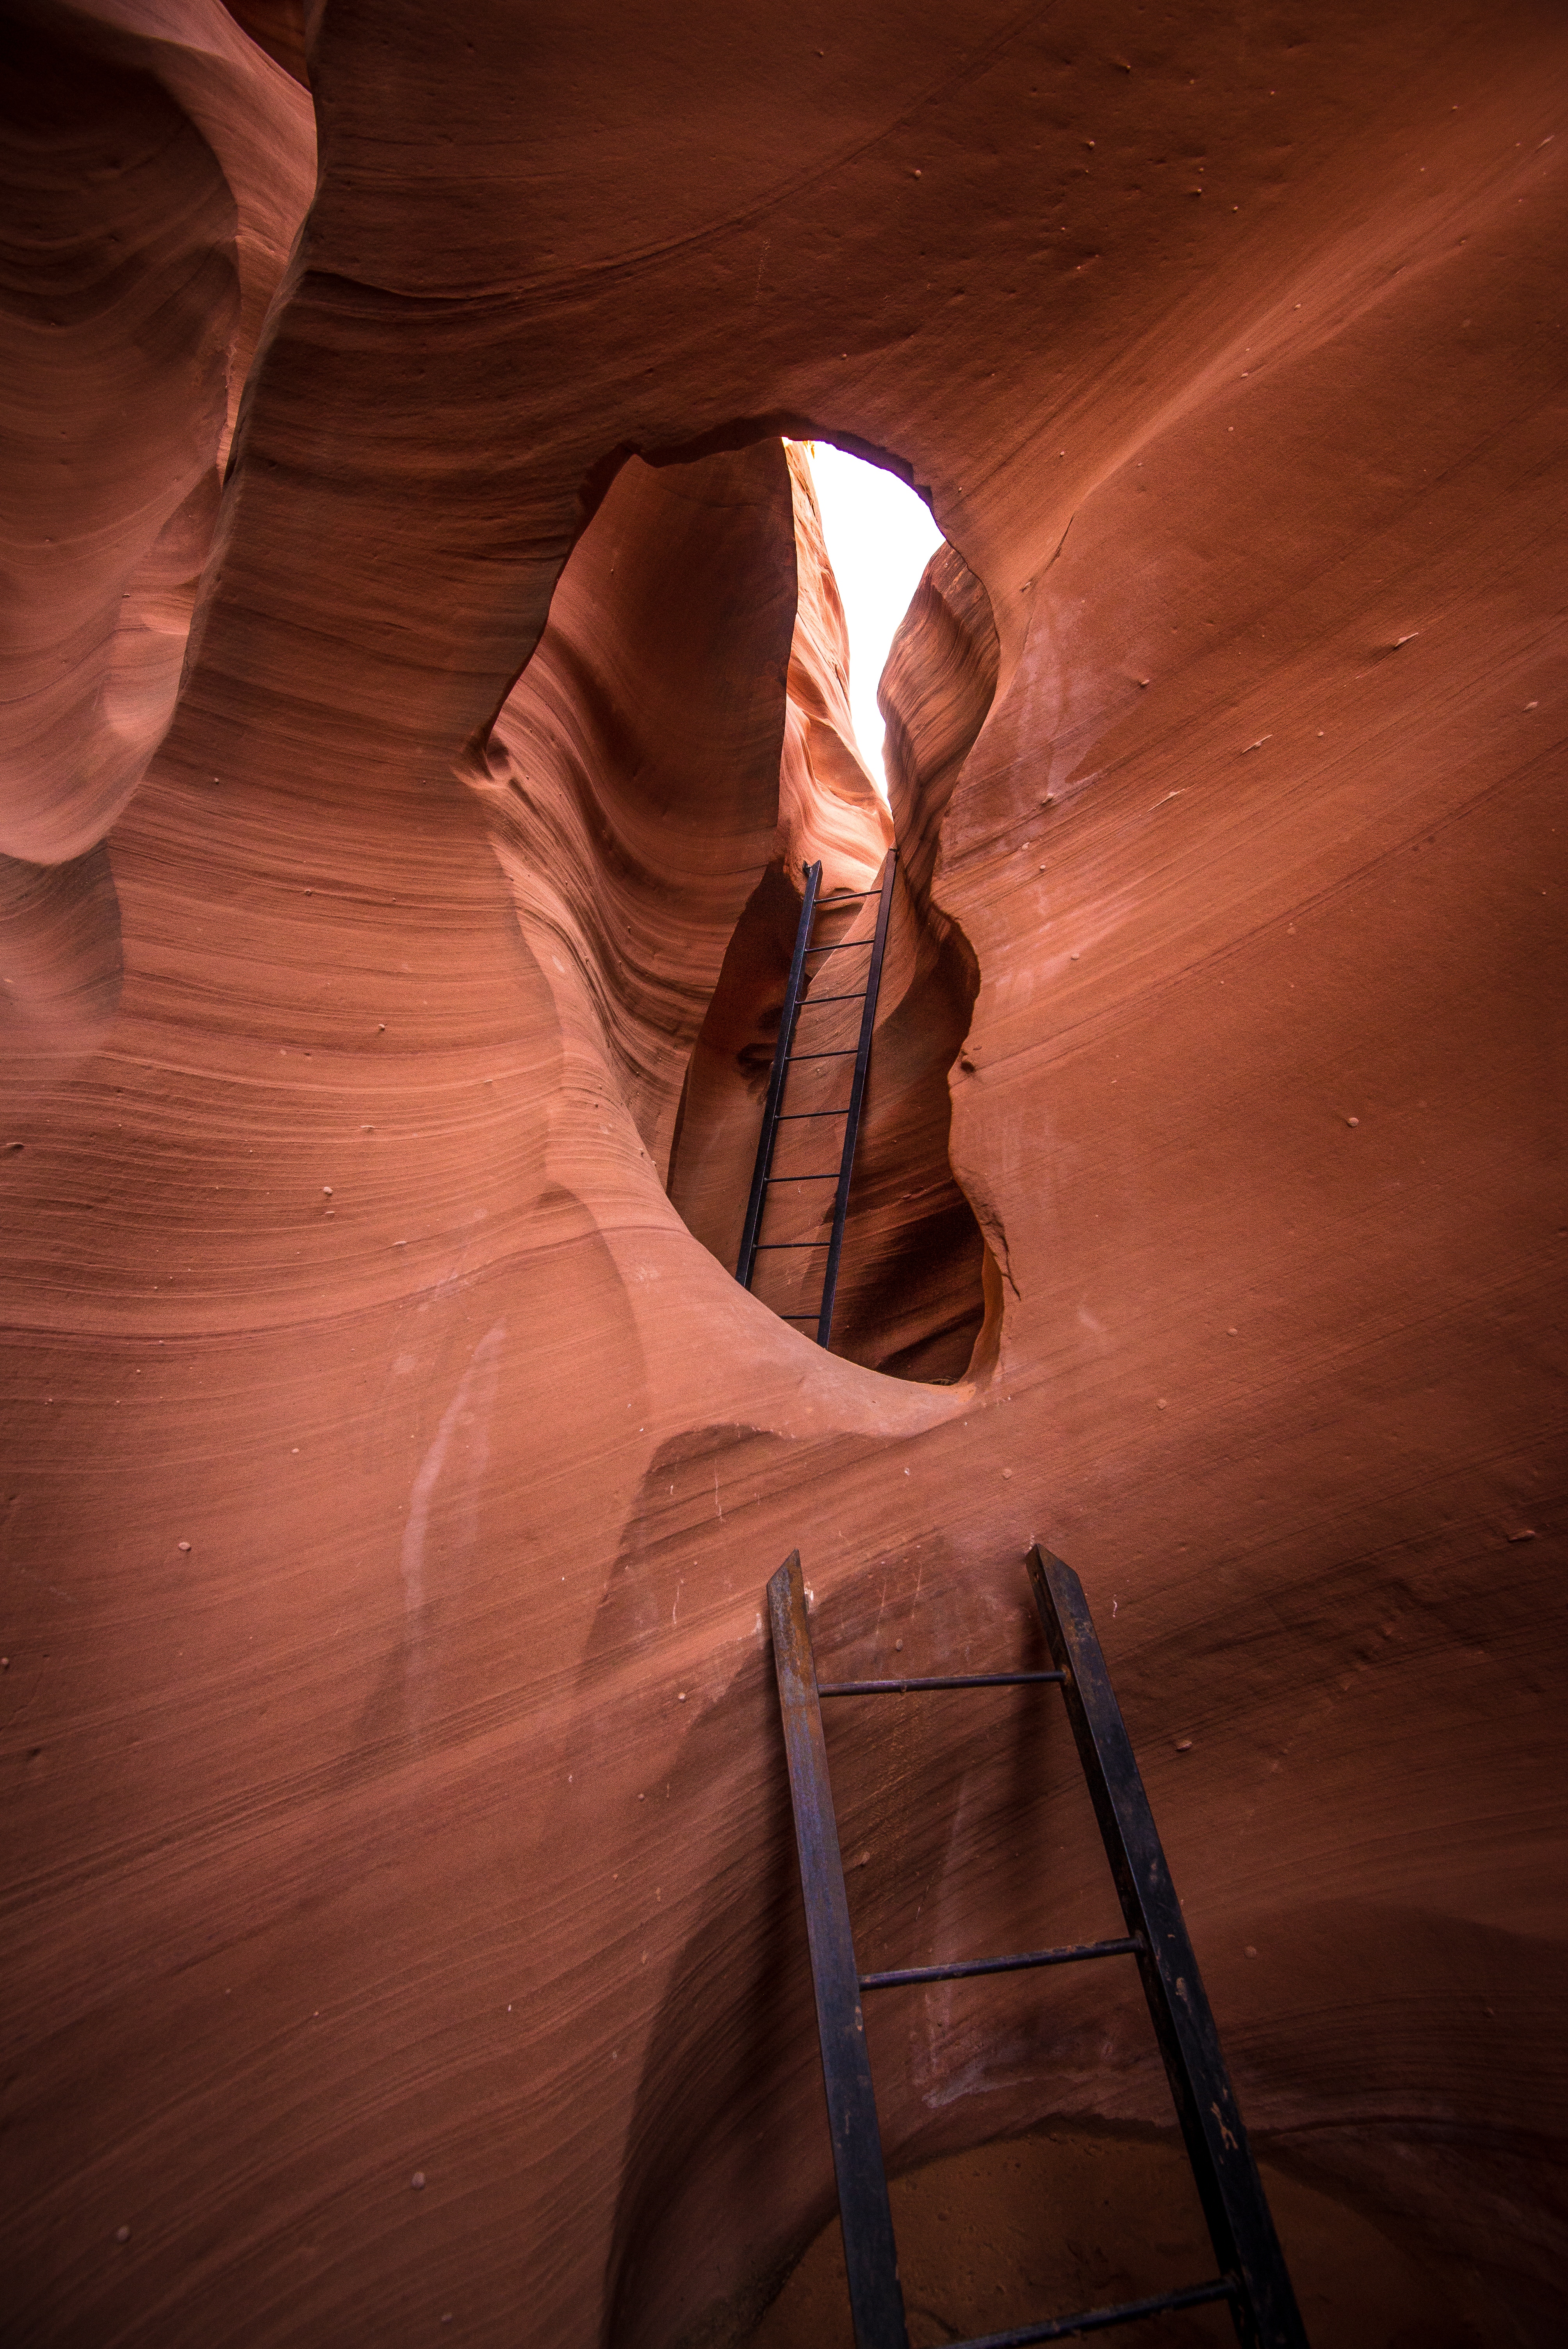 stairs, nature, canyon, stone, ladder, cave, hole